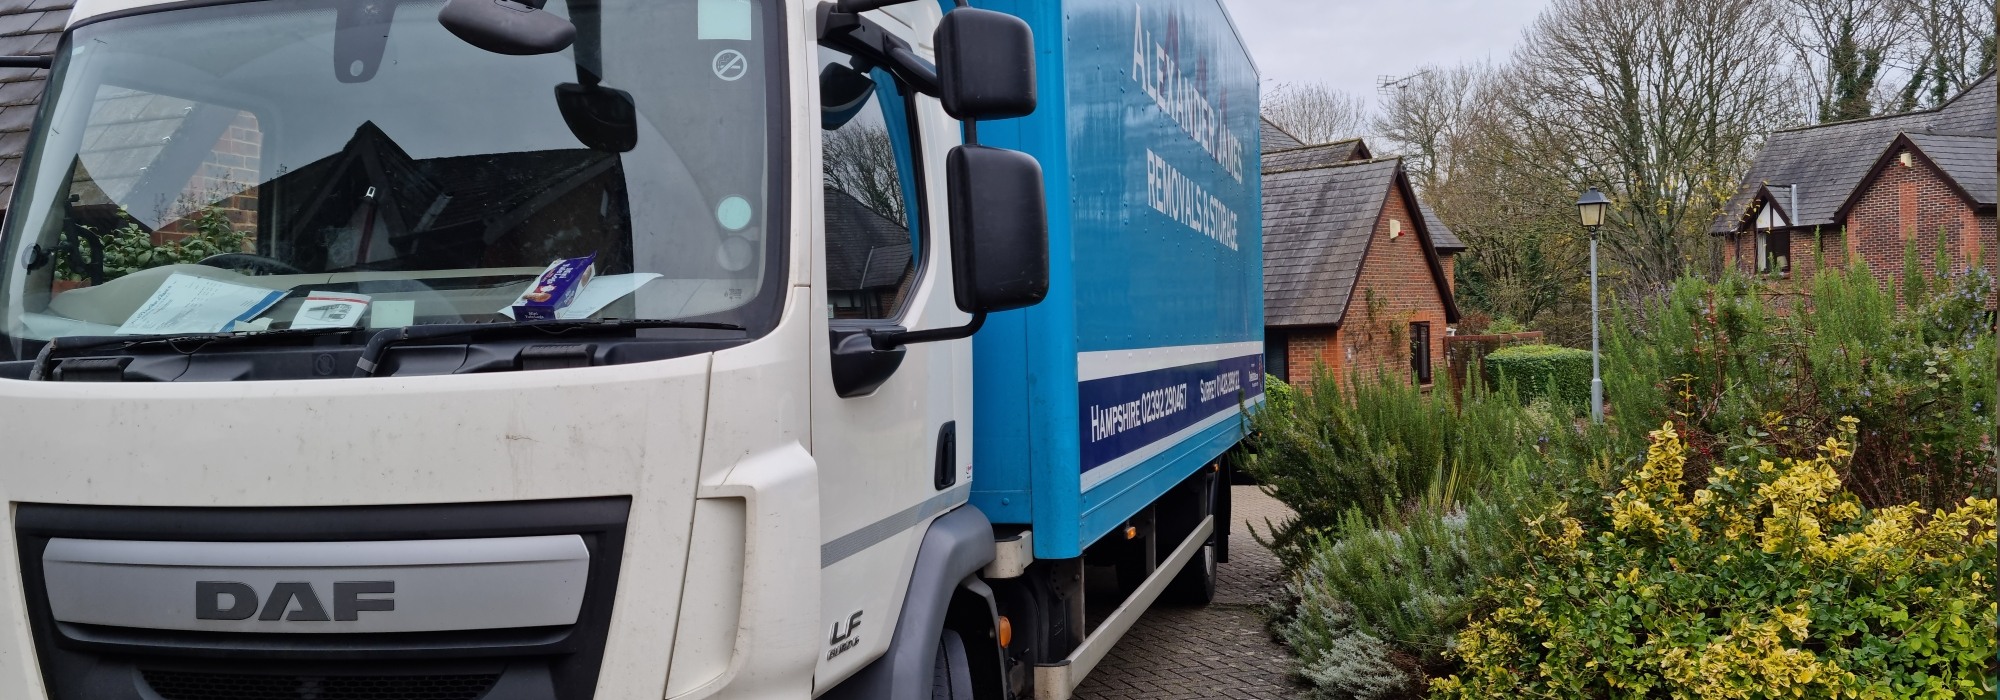 removals Waterlooville